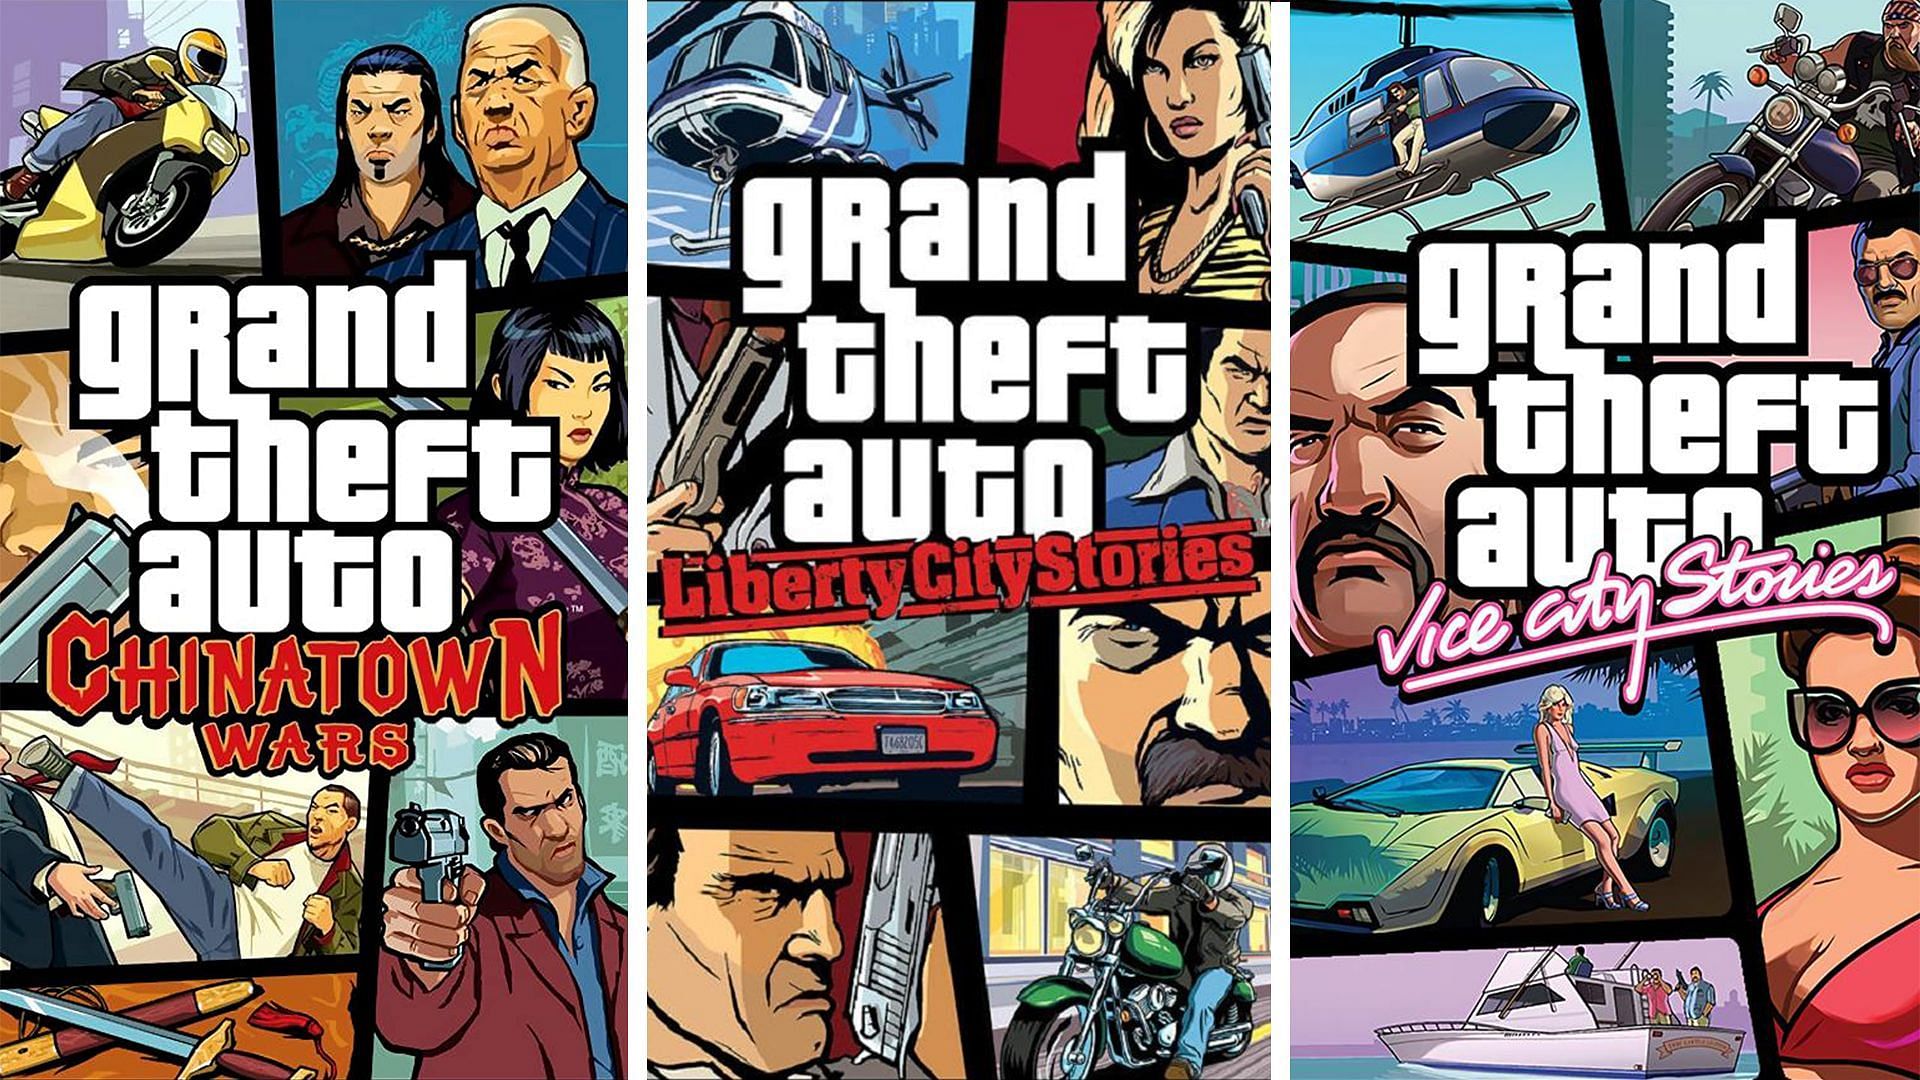 GTA: Vice City Stories released on PSP 17 years ago! Did you play